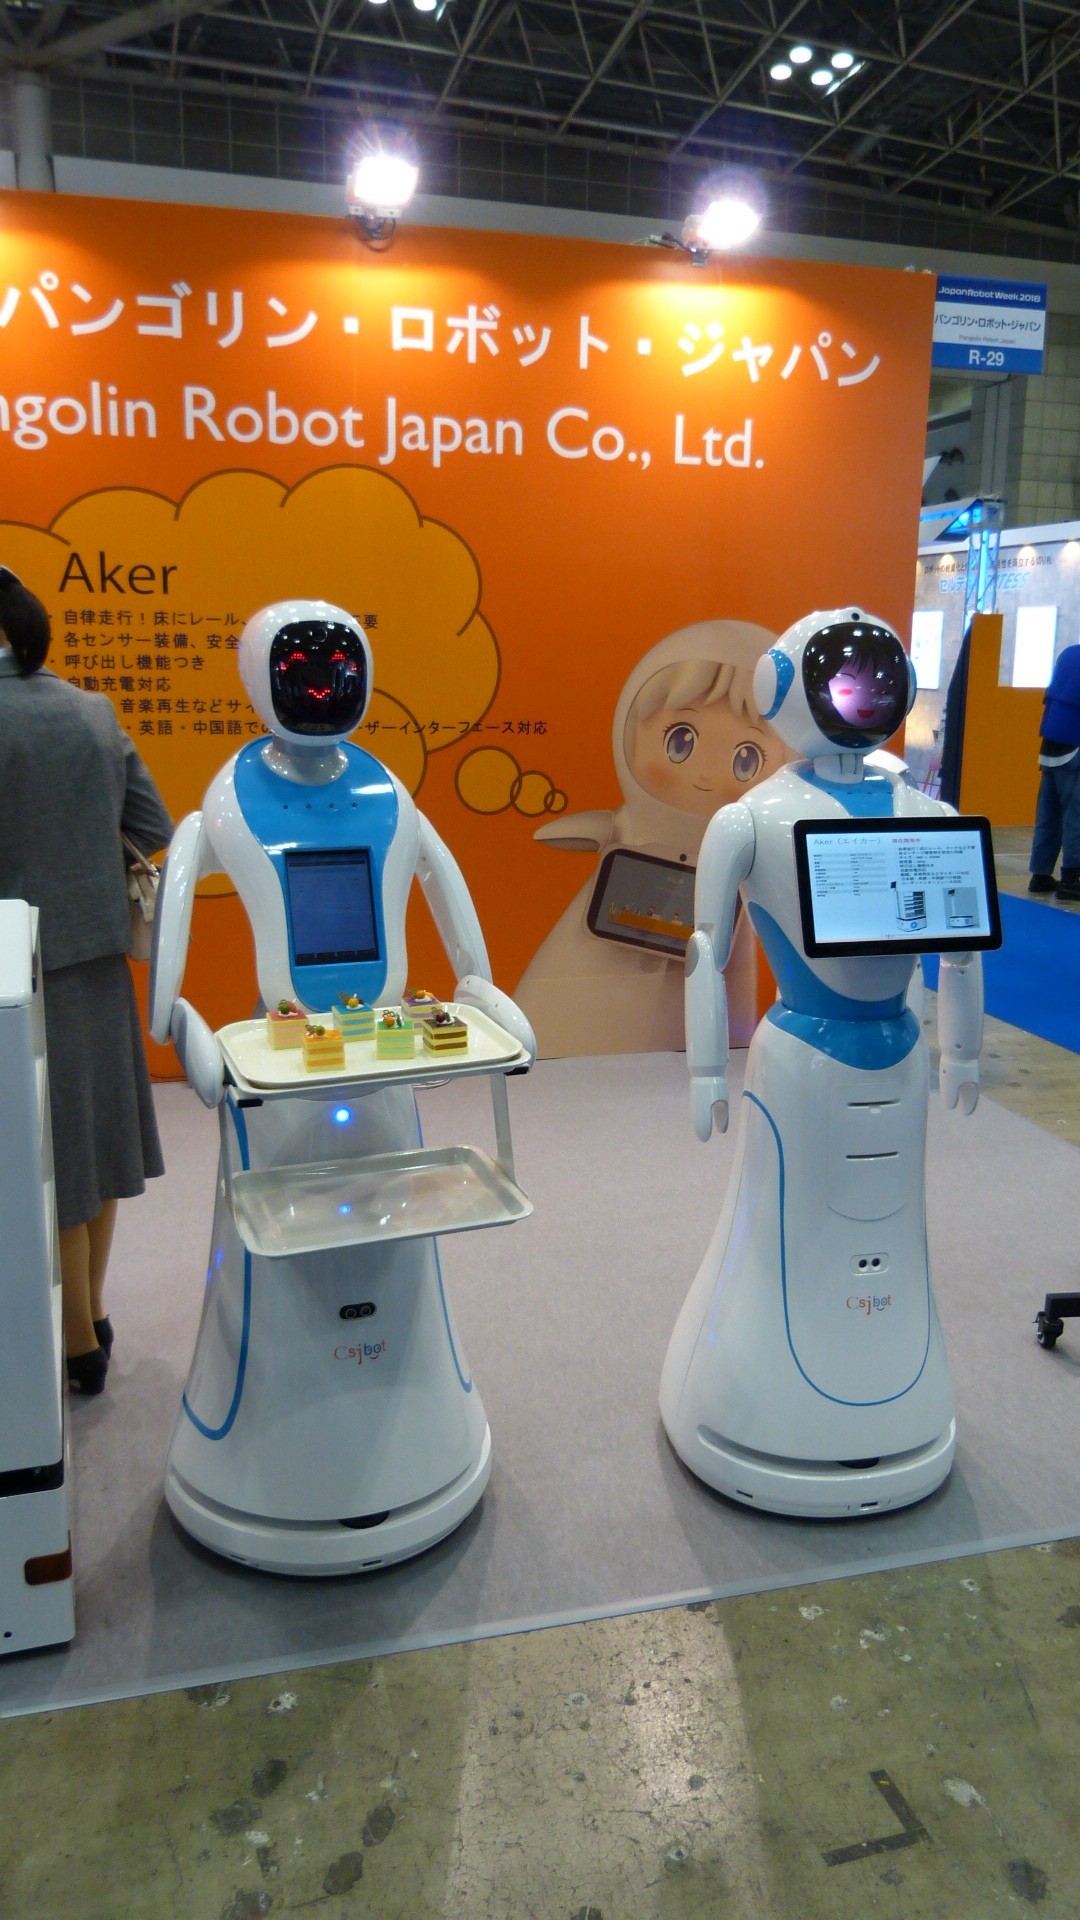 two humanoid robots with led faces.  one holds a tray of small cakes and the other has a screen on the front